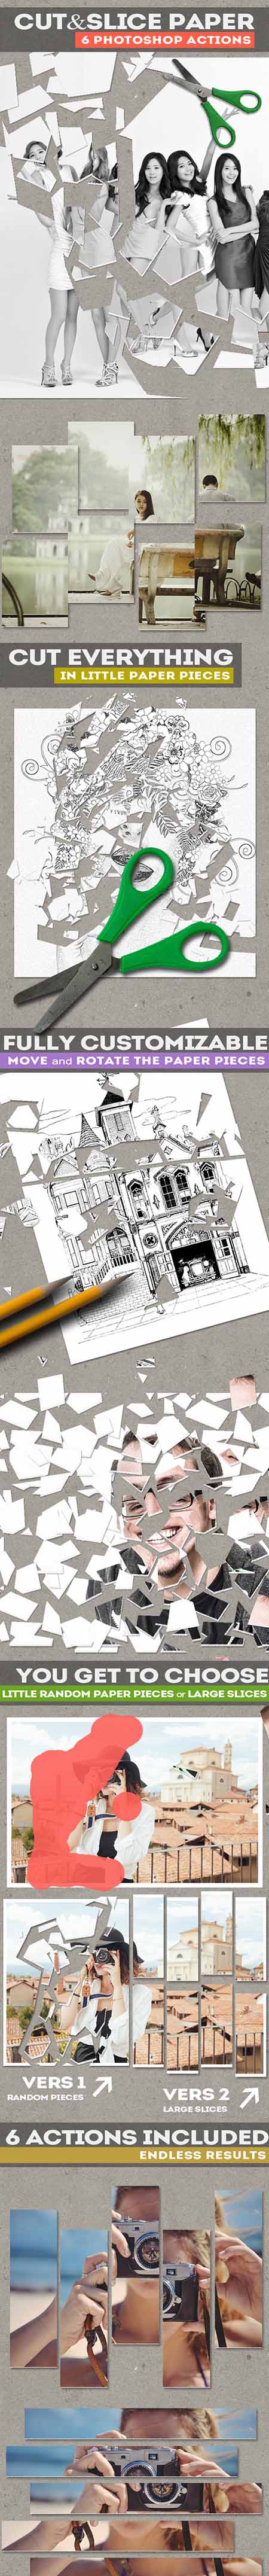 GraphicRiver - Cut and Slice Paper Photoshop Actions 10764416